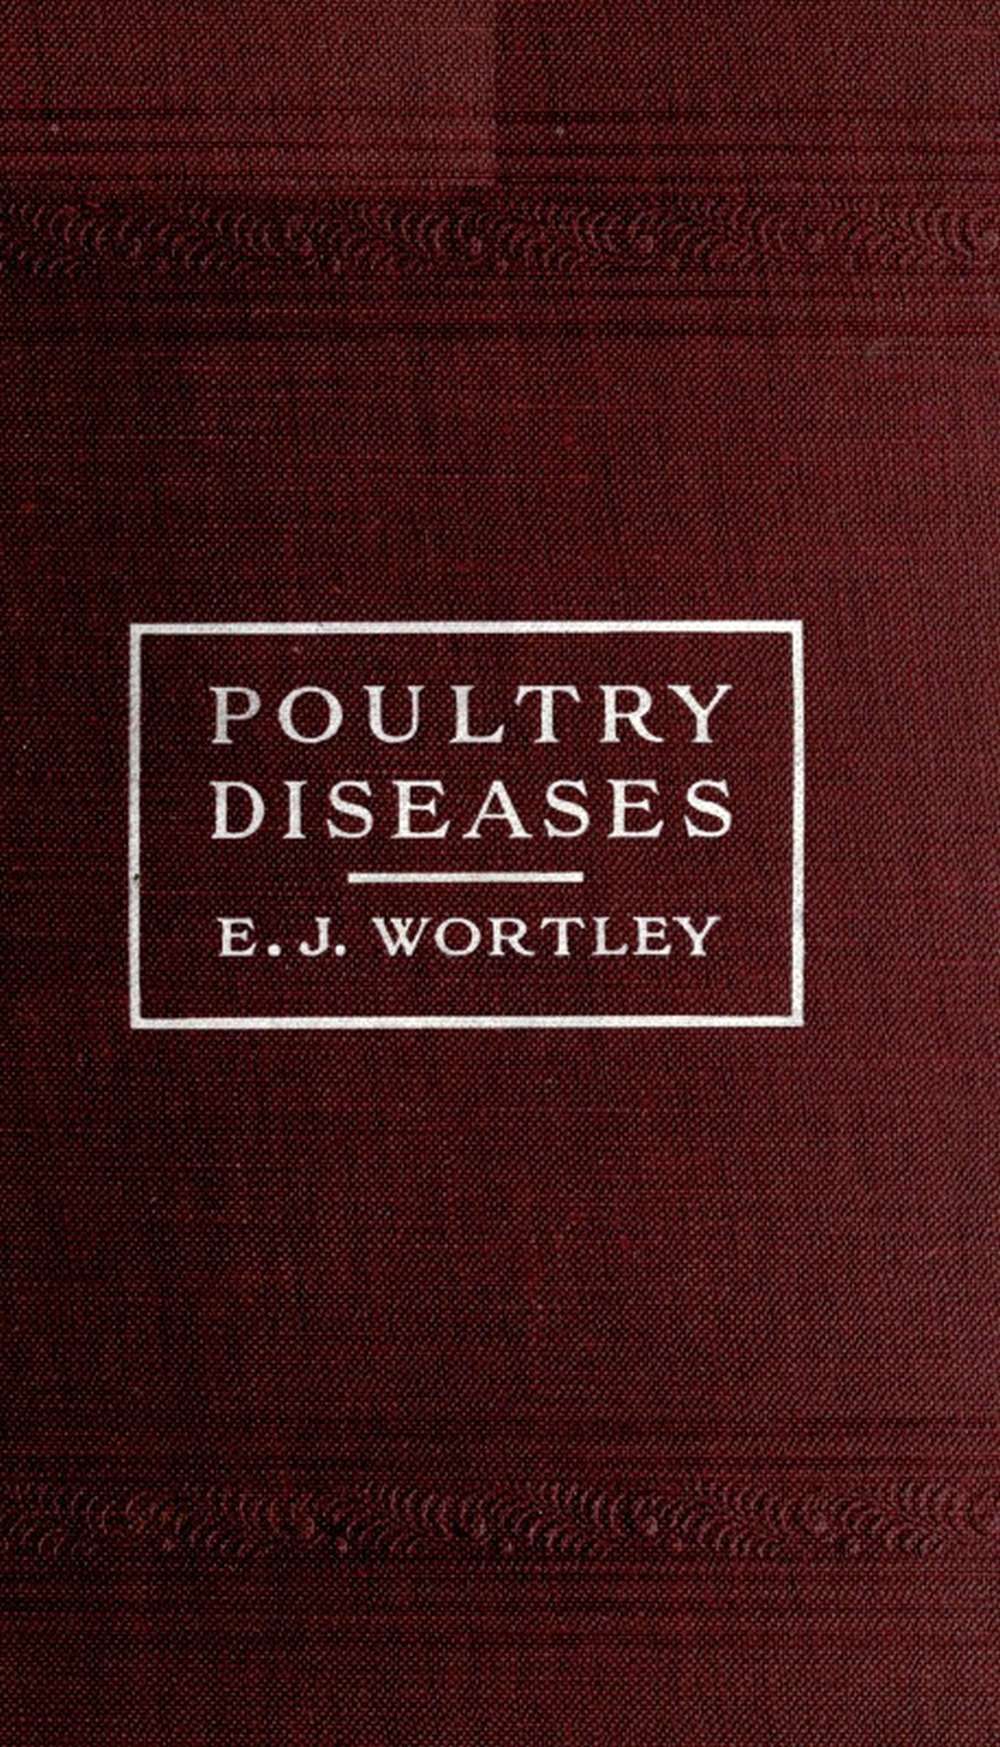 Poultry diseases&#10;Causes, symptoms and treatment, with notes on post-mortem examinations